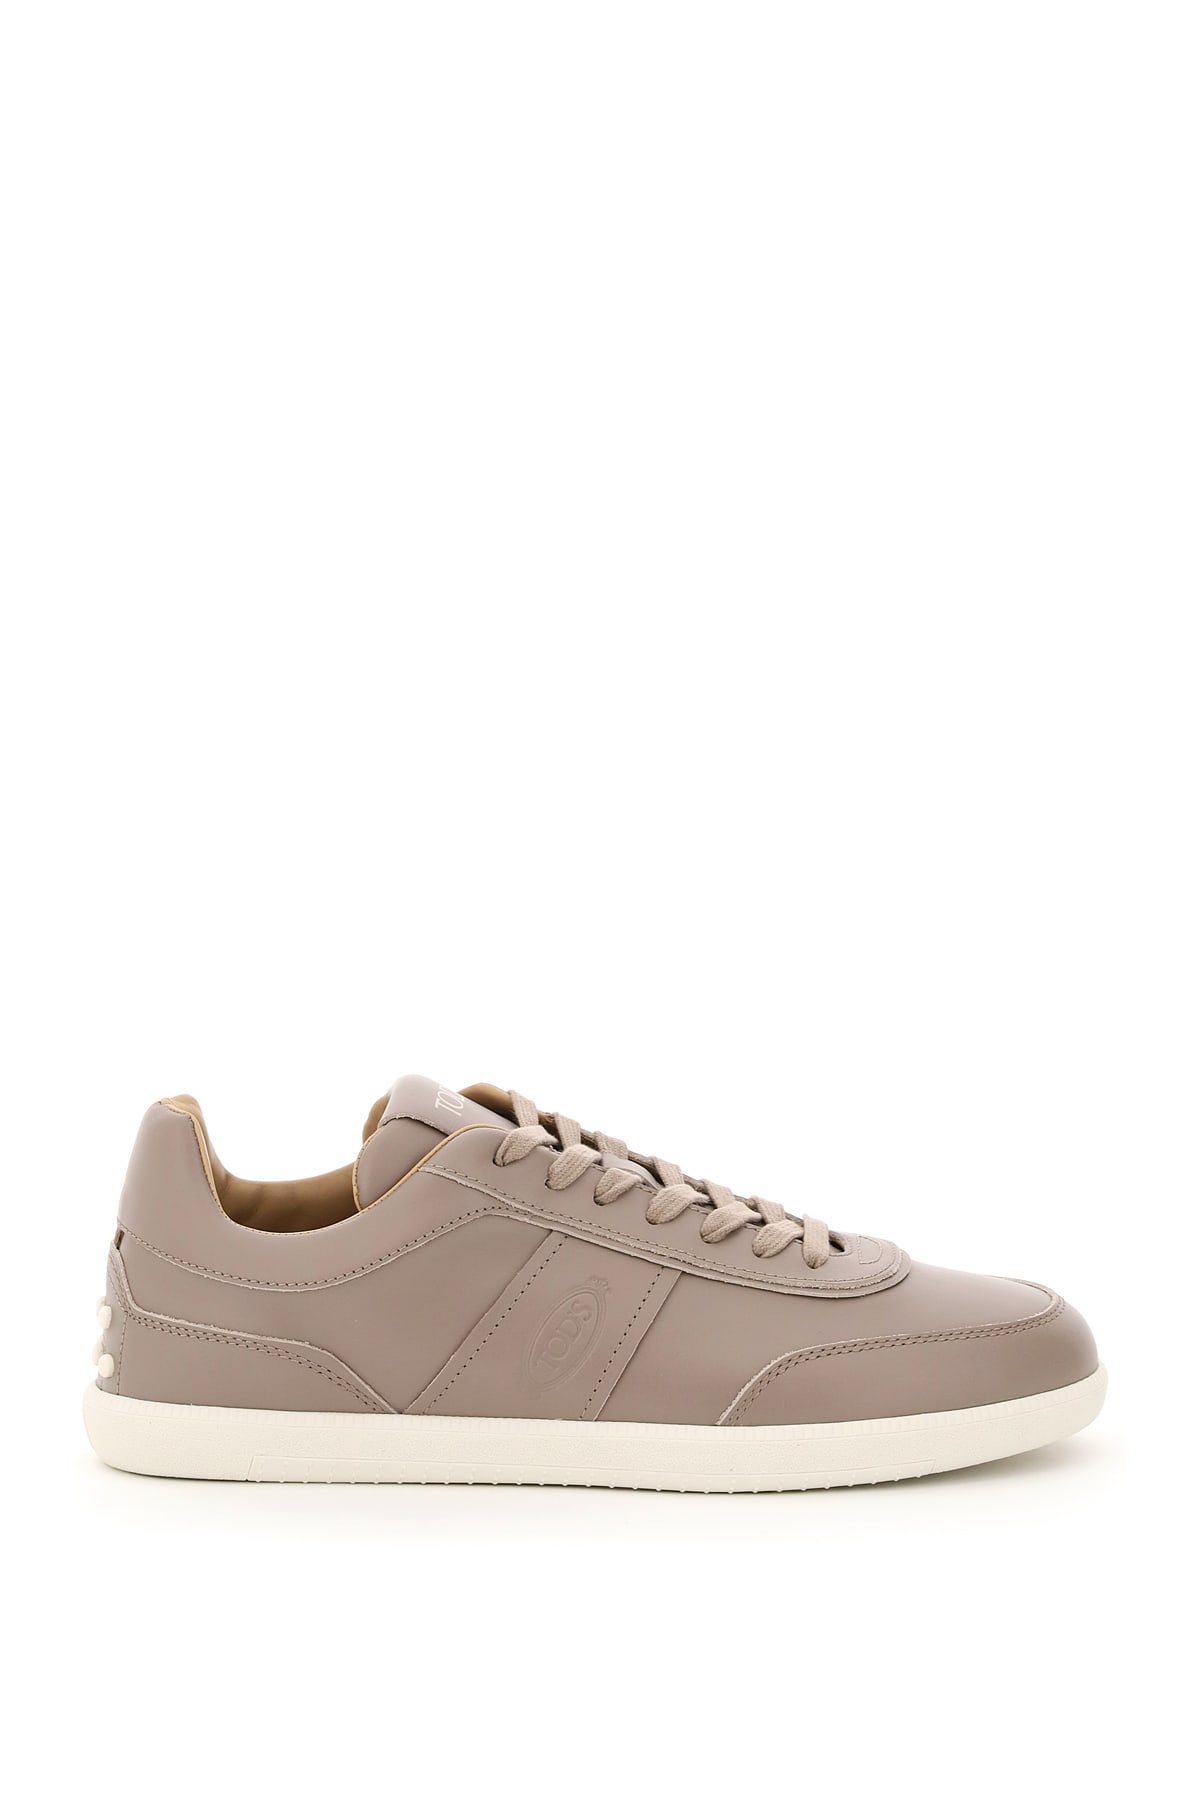 Tods Tabs Leather Sneakers